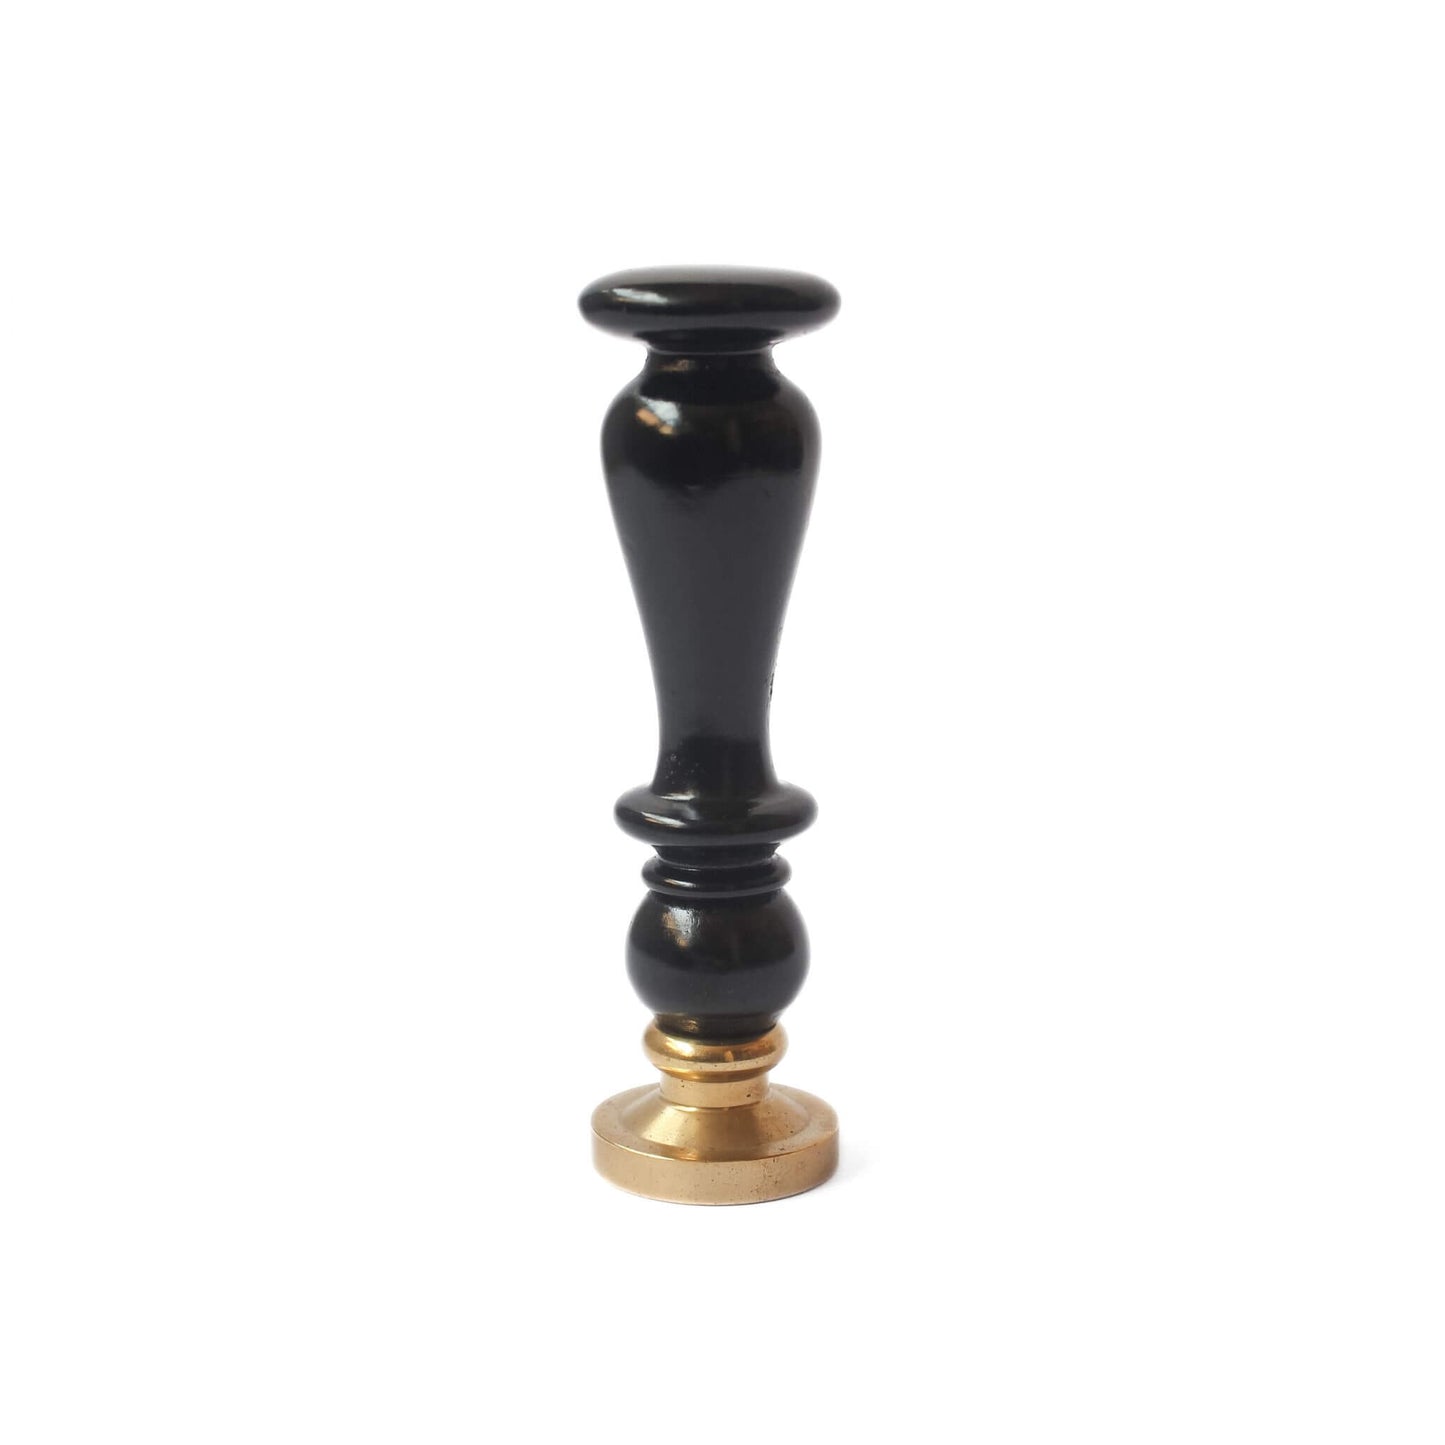 Side view of Fern Wax seal brass seal head with black wood handle